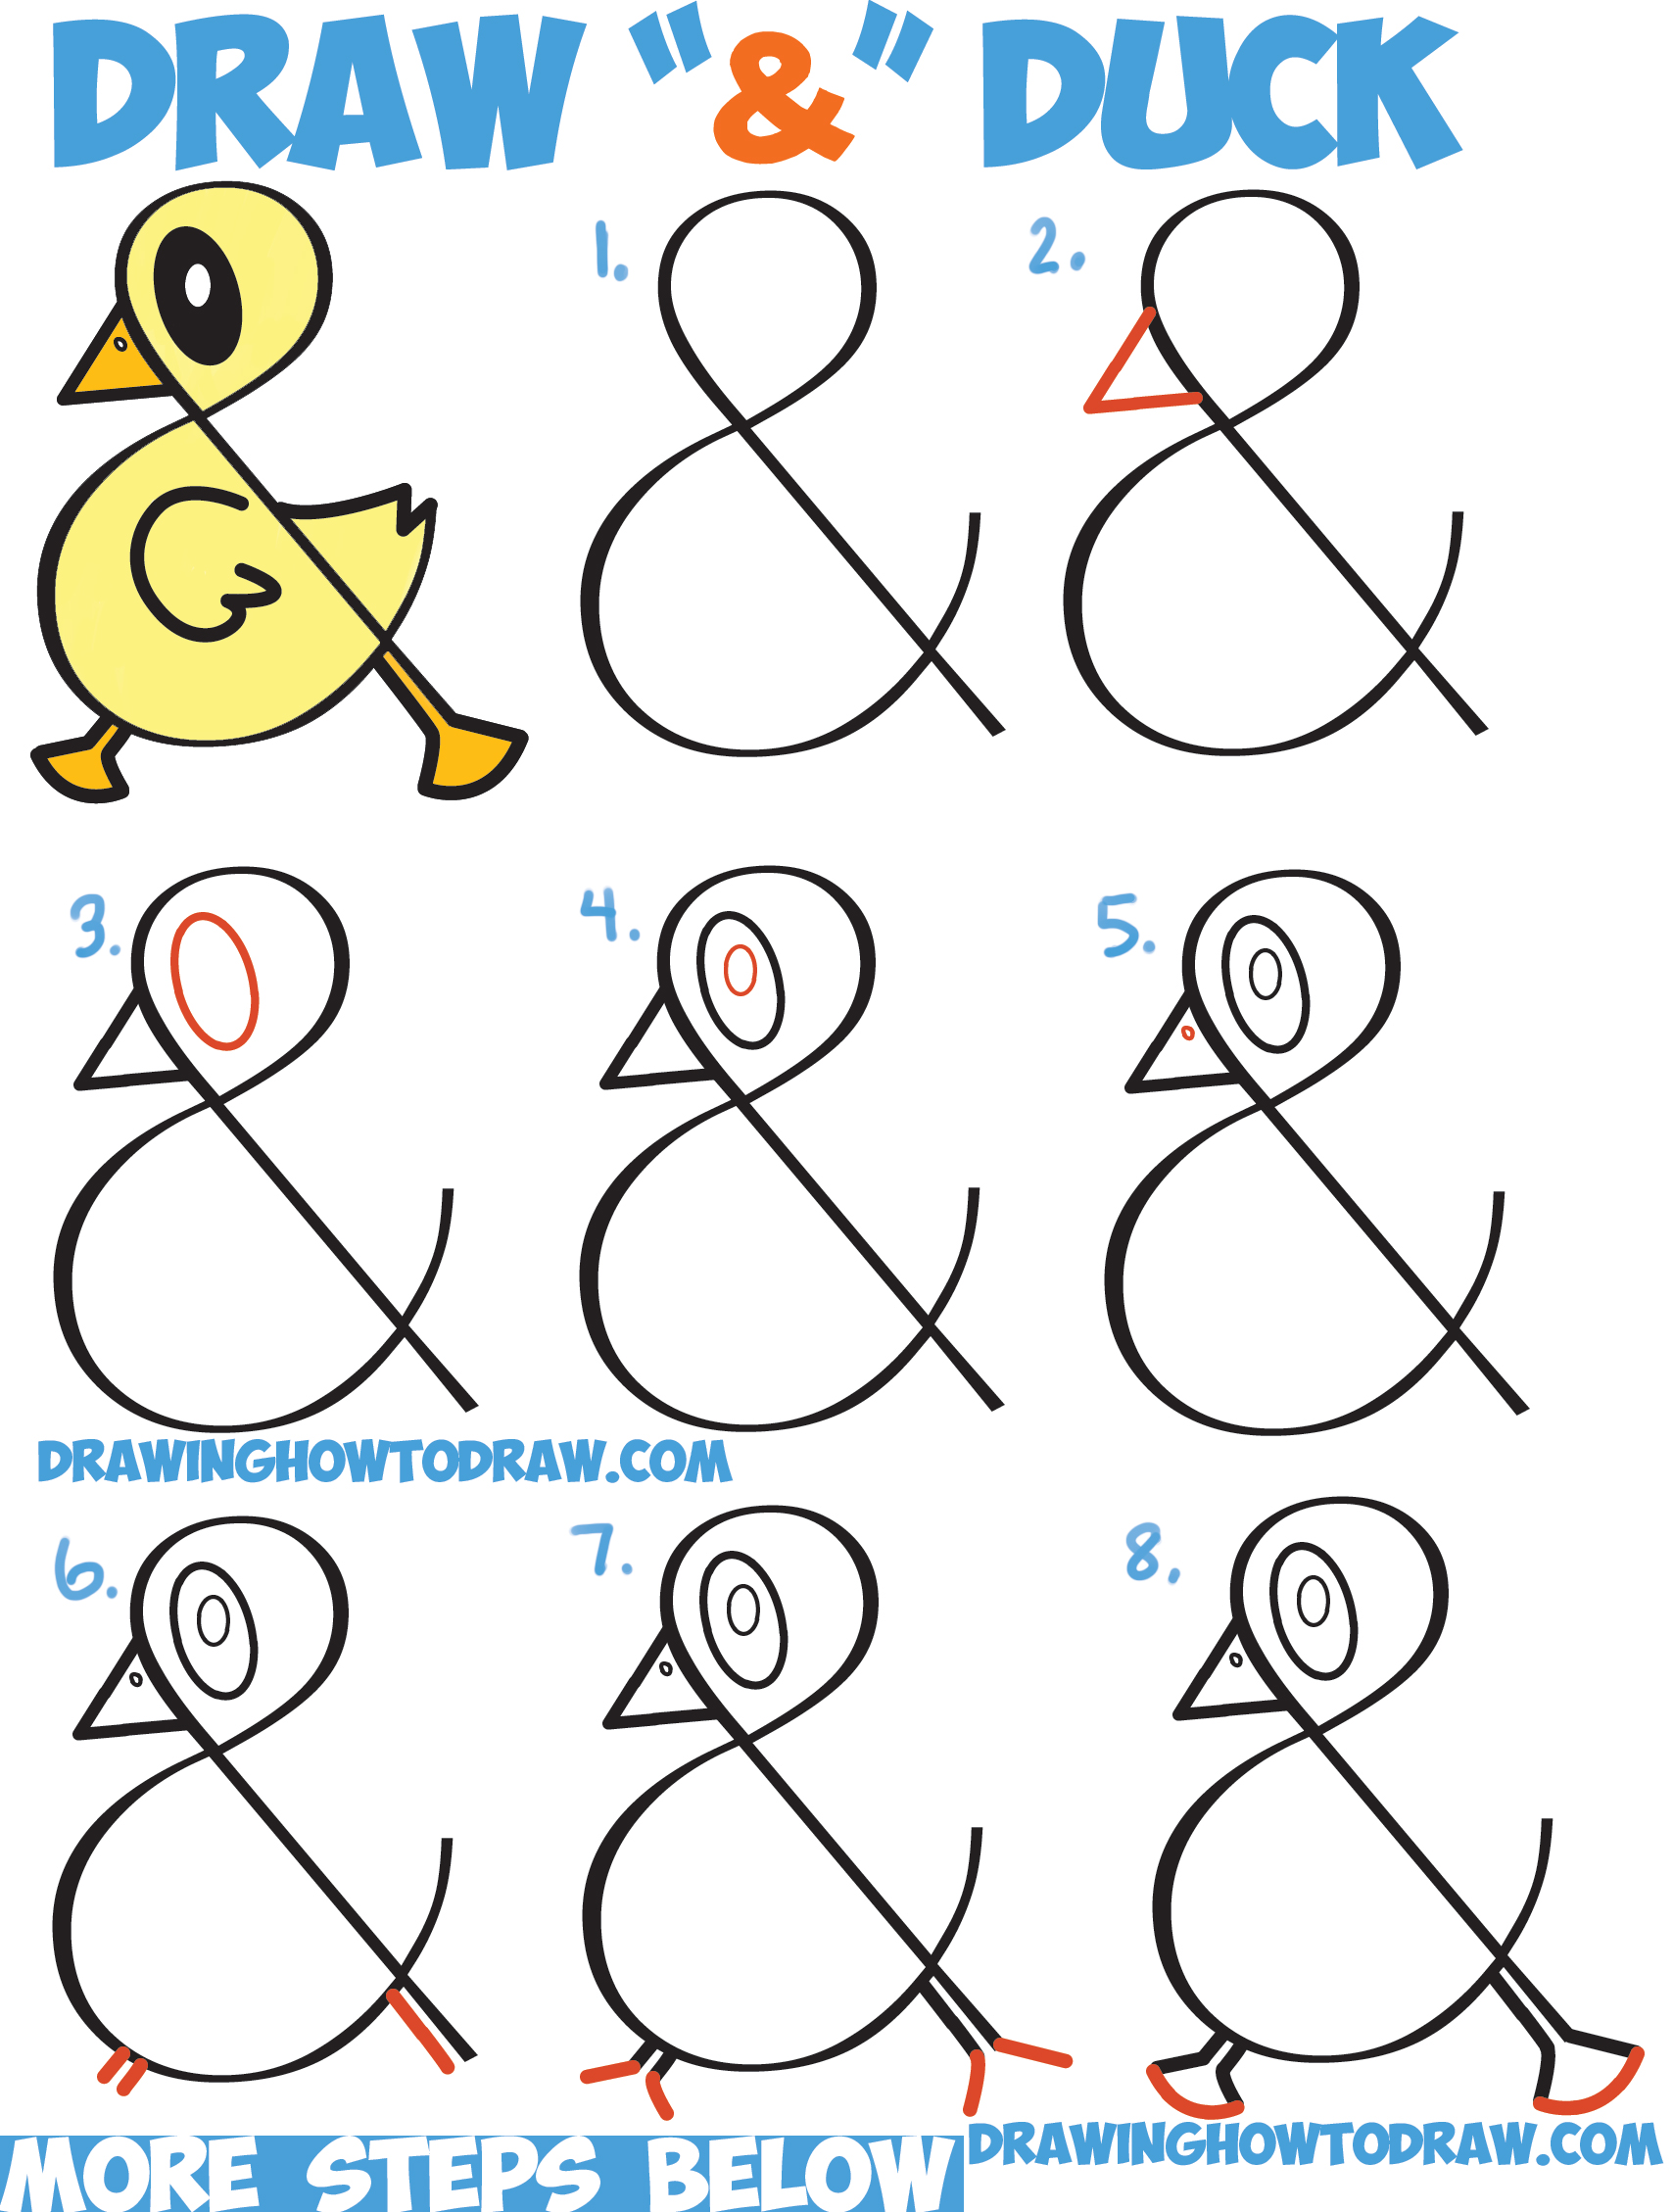 how-to-draw-a-cute-cartoon-duck-from-ampersand-symbol-easy-step-by